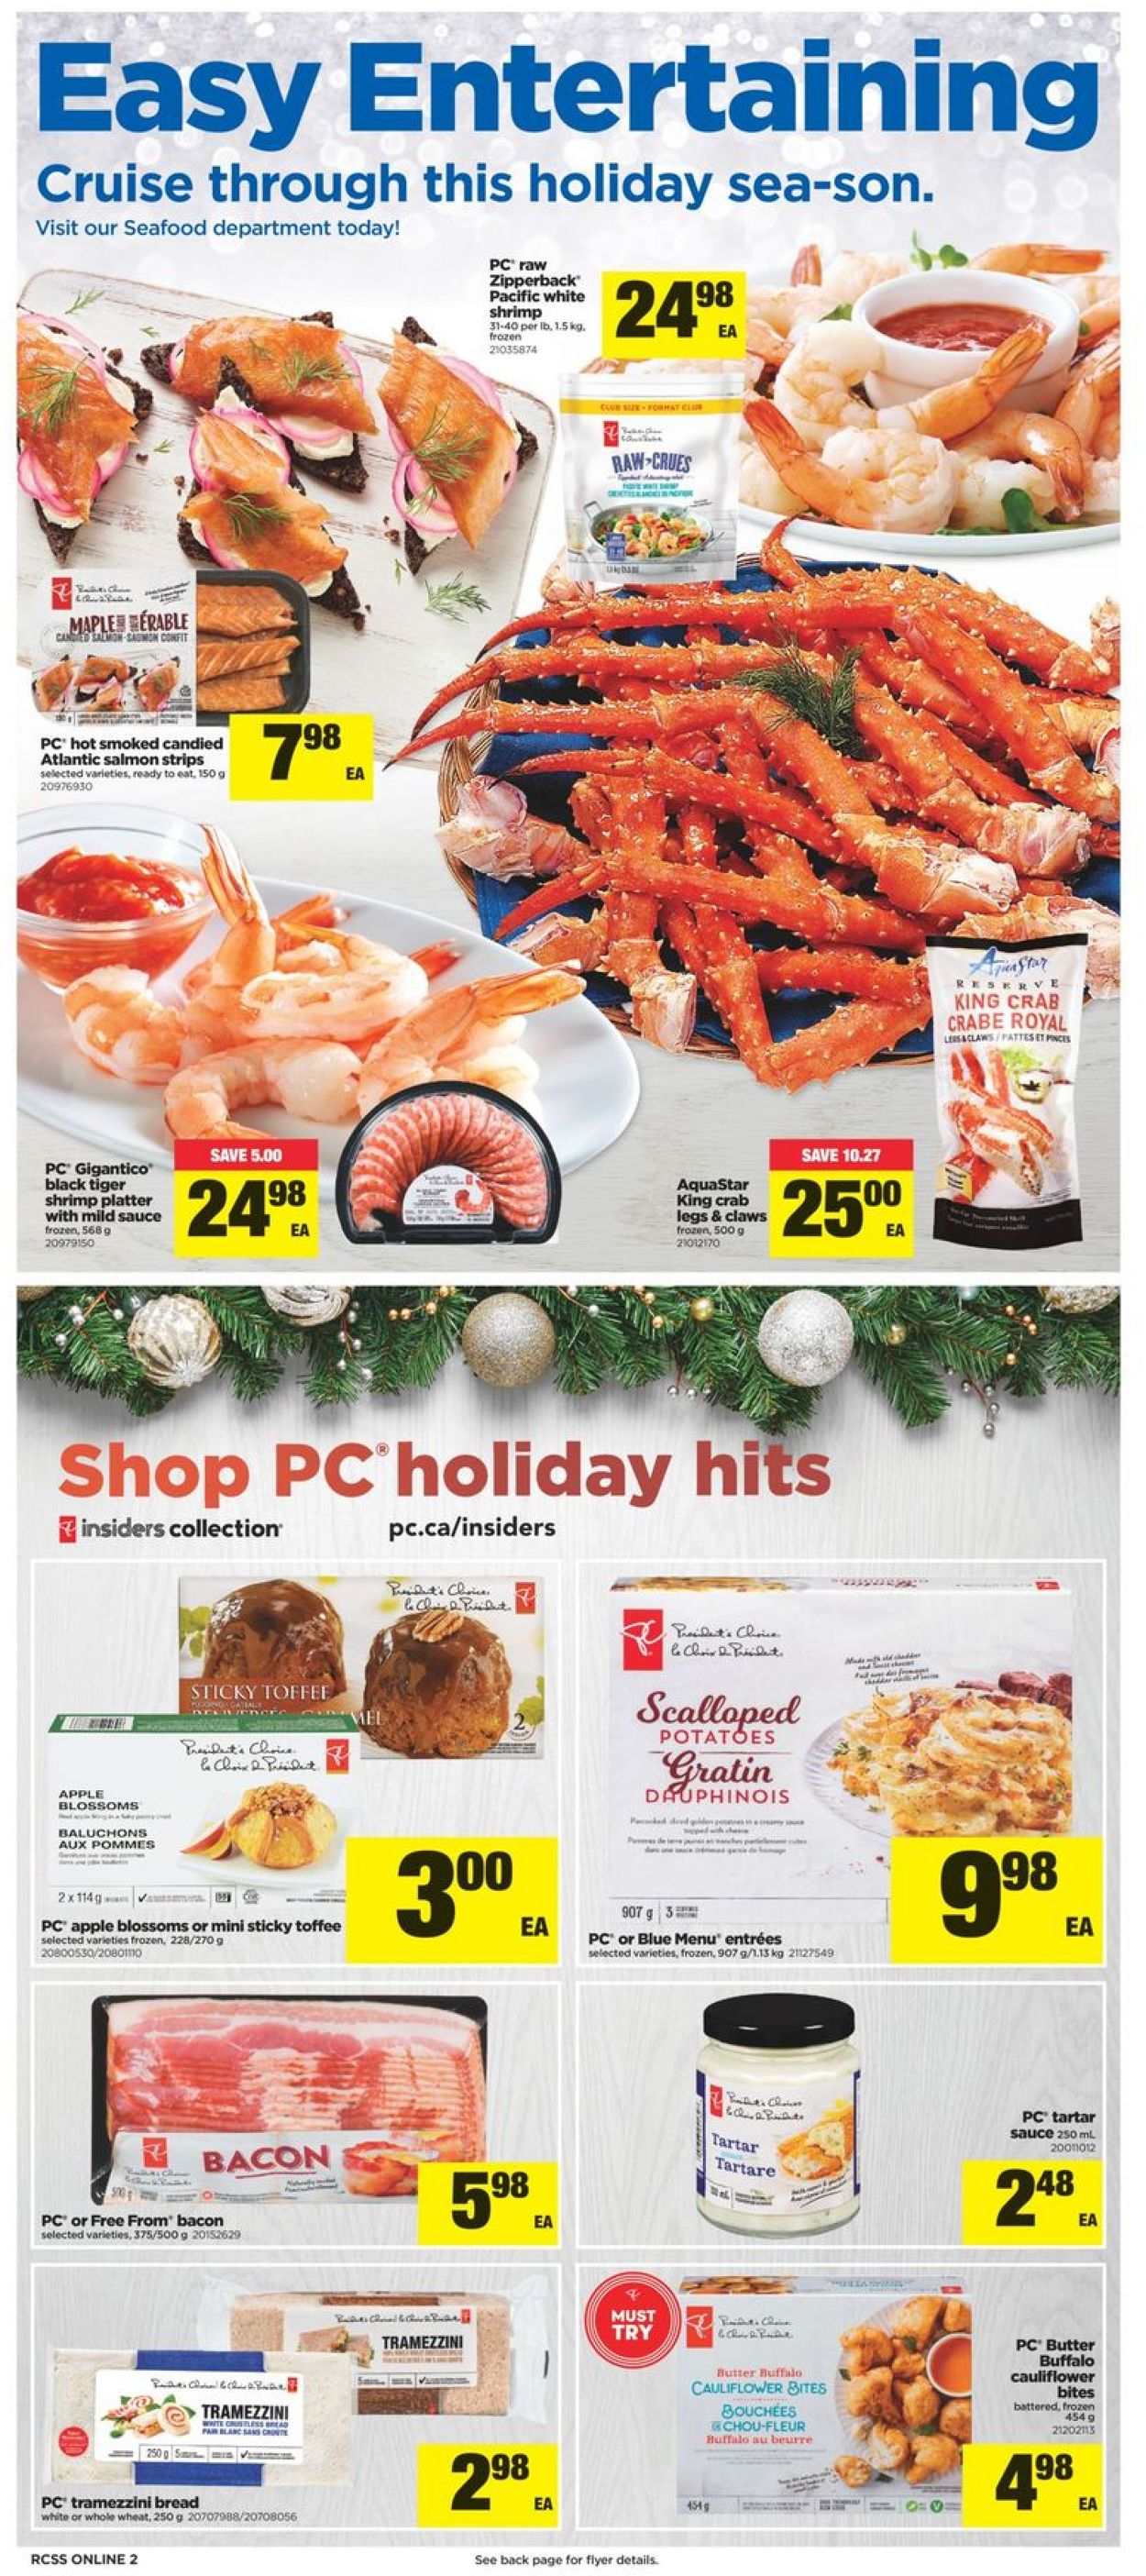 Real Canadian Superstore Flyer from 11/21/2019